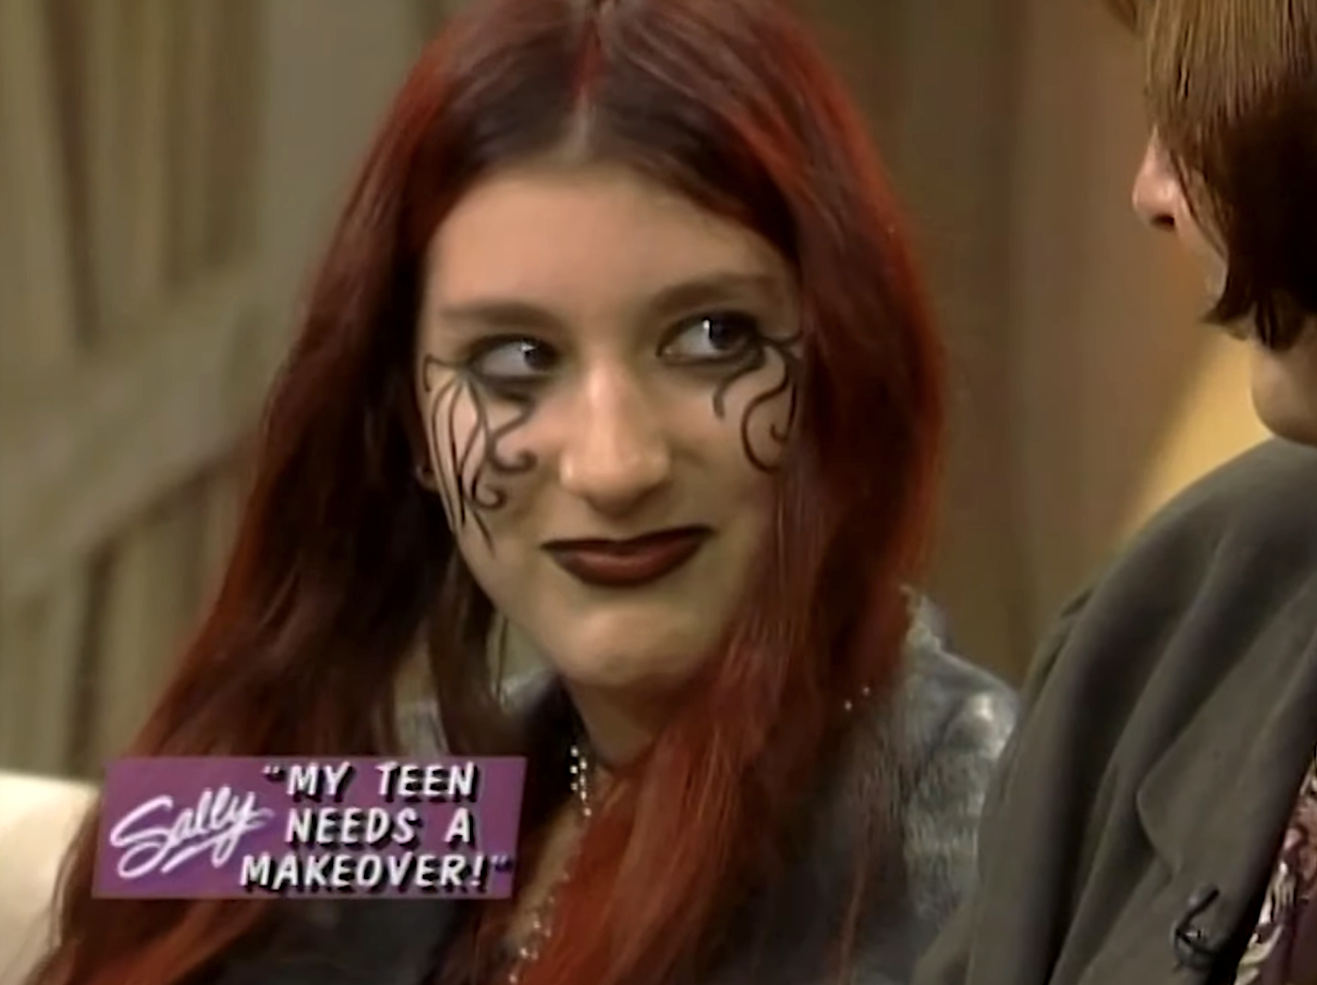 &quot;My teen needs a makeover!&quot;